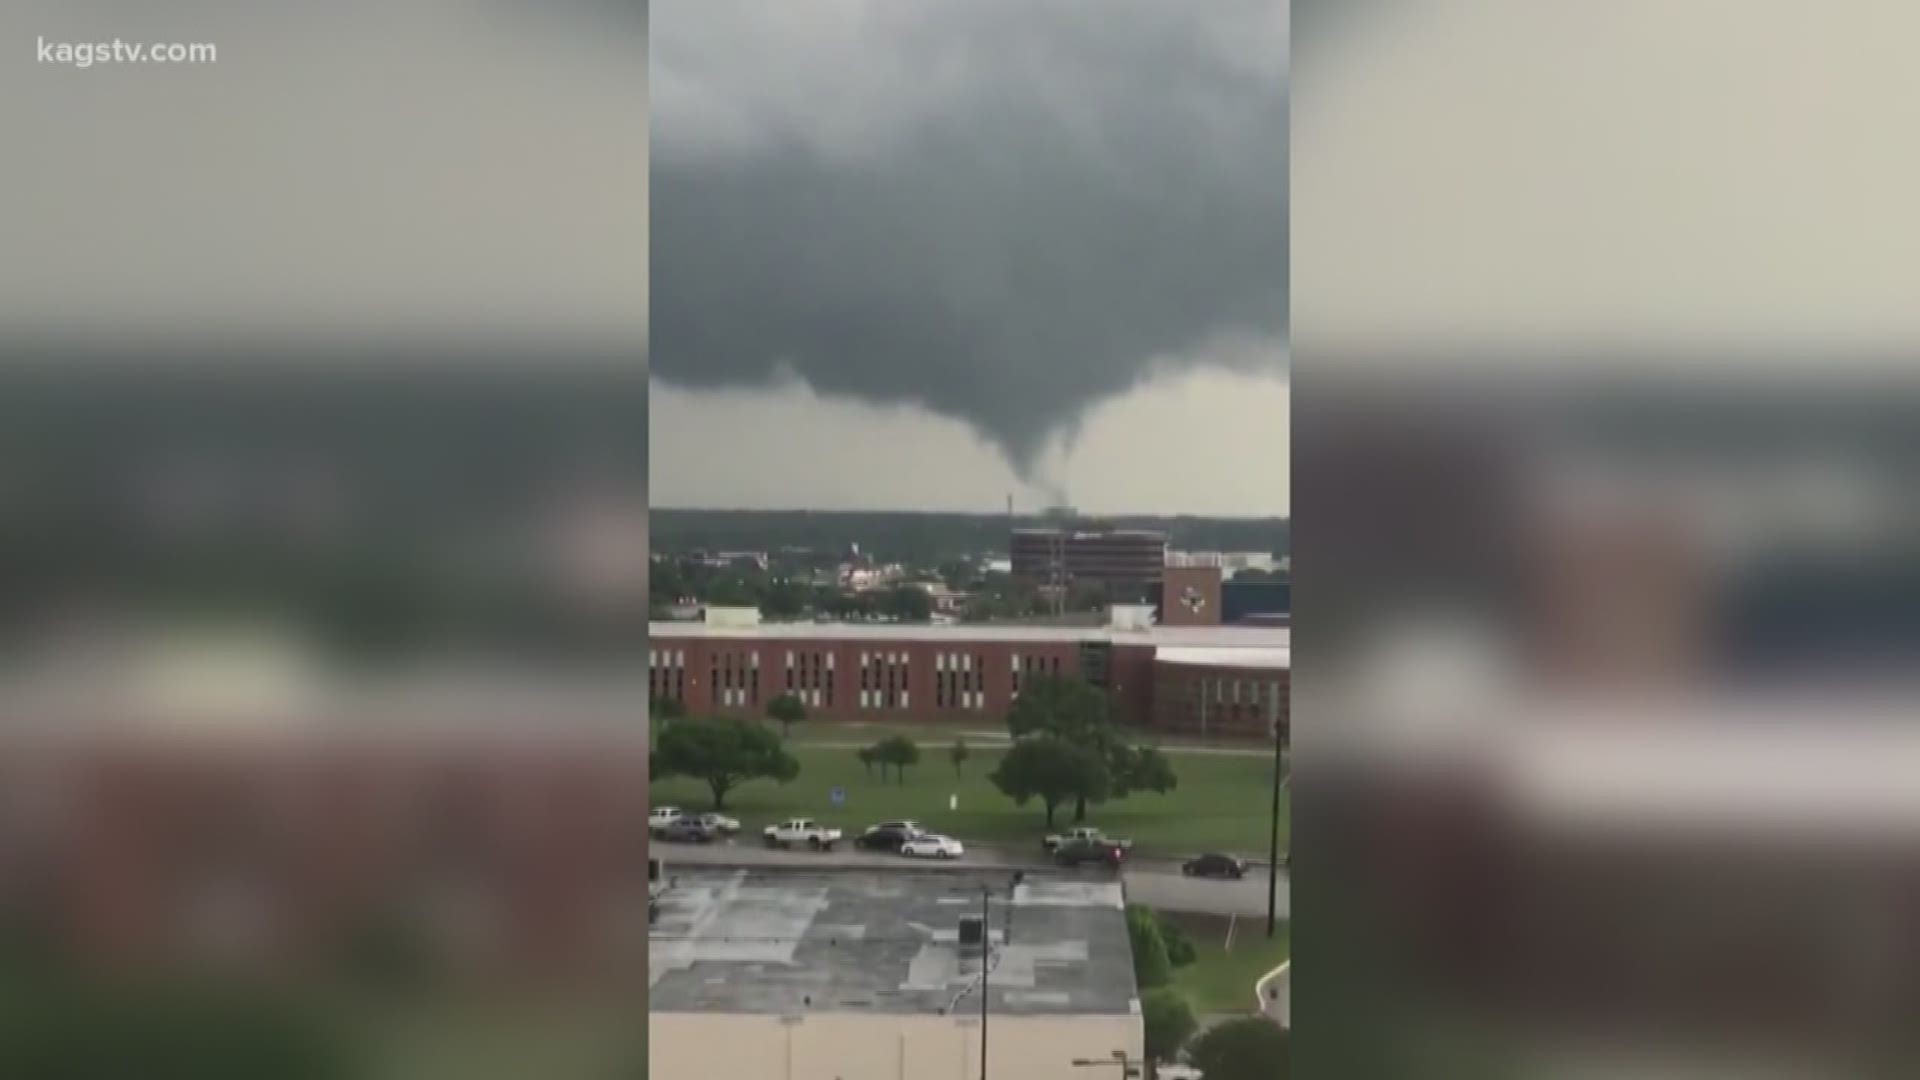 Video of a likely tornado touching down in Bryan, TX on Wednesday around 5 pm.